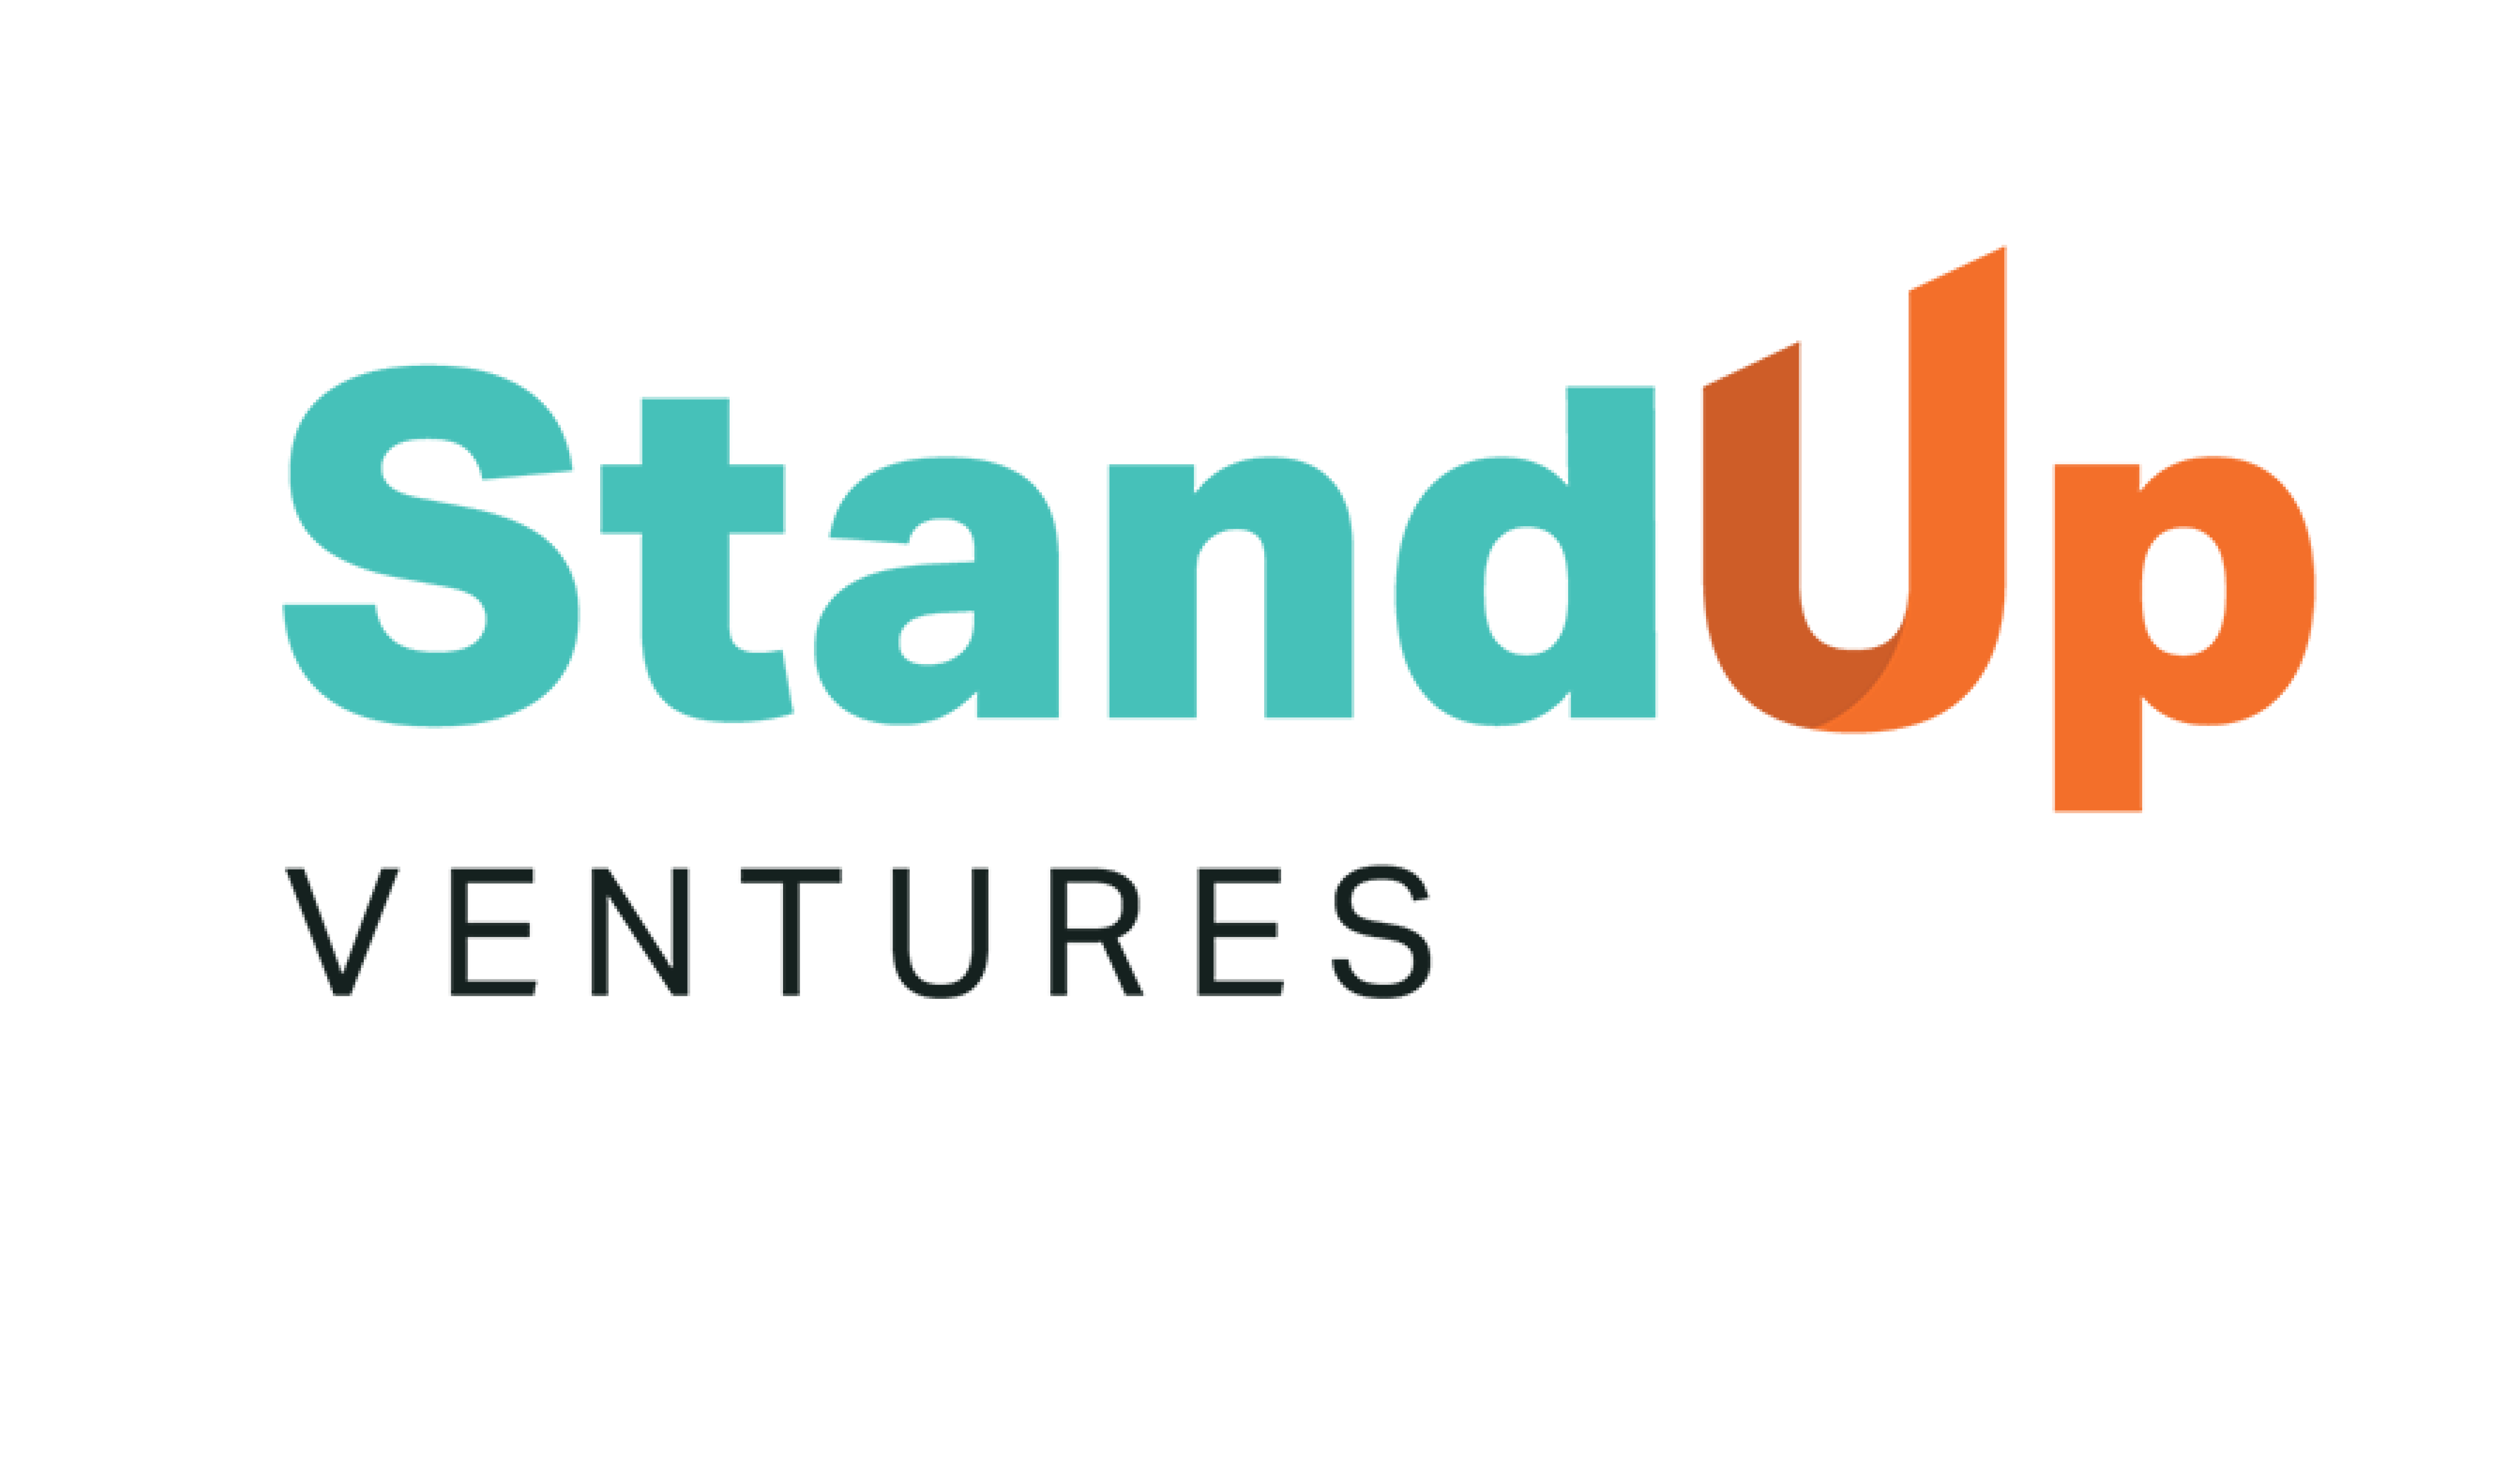 Our Investment in StandUp Ventures